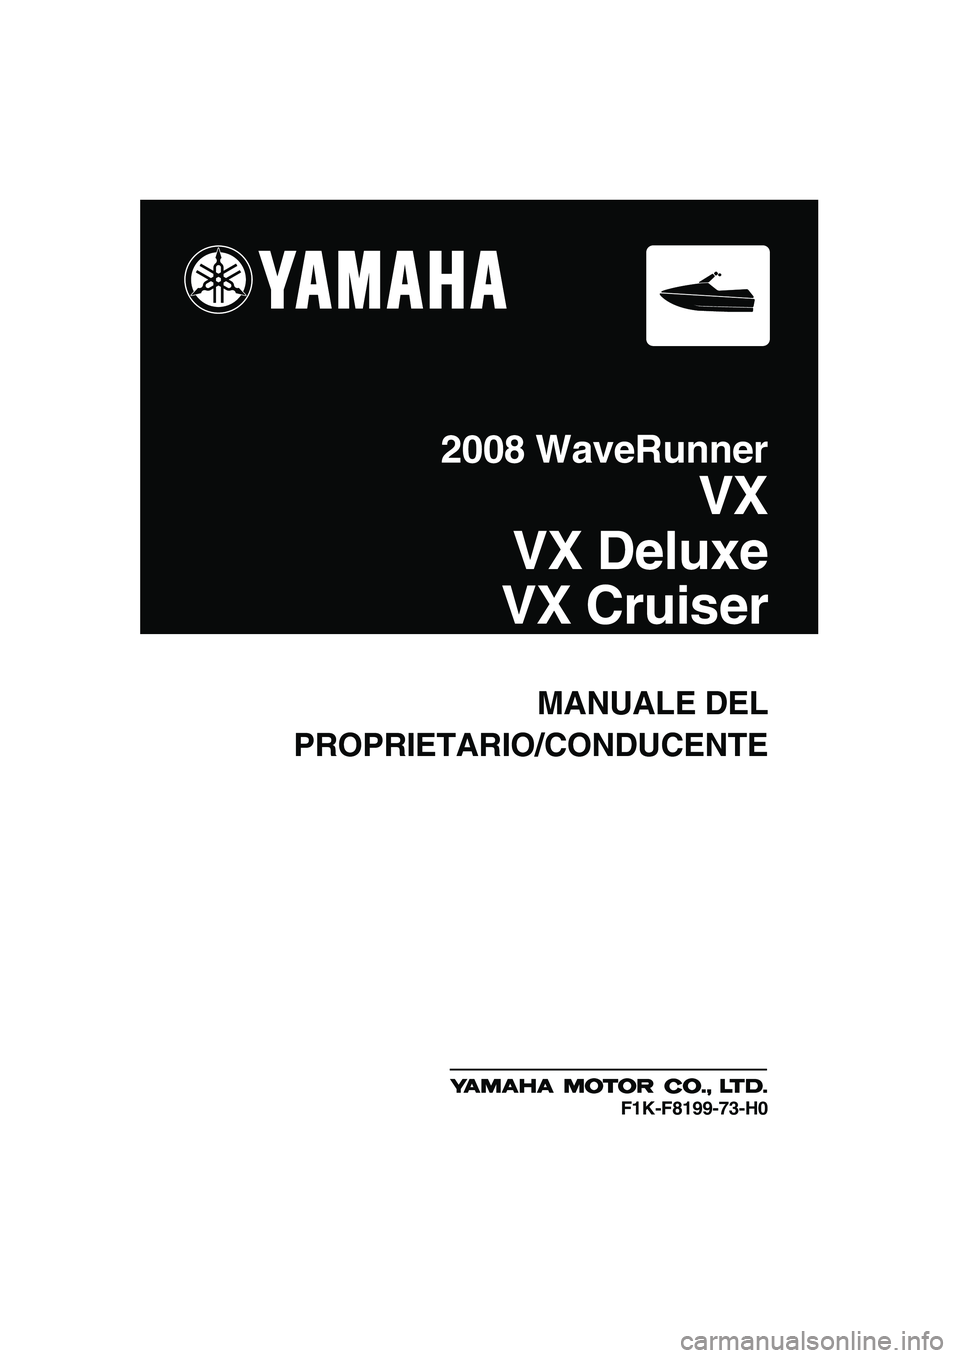 YAMAHA VX SPORT 2008  Manuale duso (in Italian) MANUALE DEL
PROPRIETARIO/CONDUCENTE
2008 WaveRunner
VX
VX Deluxe
VX Cruiser
F1K-F8199-73-H0
UF1K73H0.book  Page 1  Tuesday, July 10, 2007  9:24 PM 